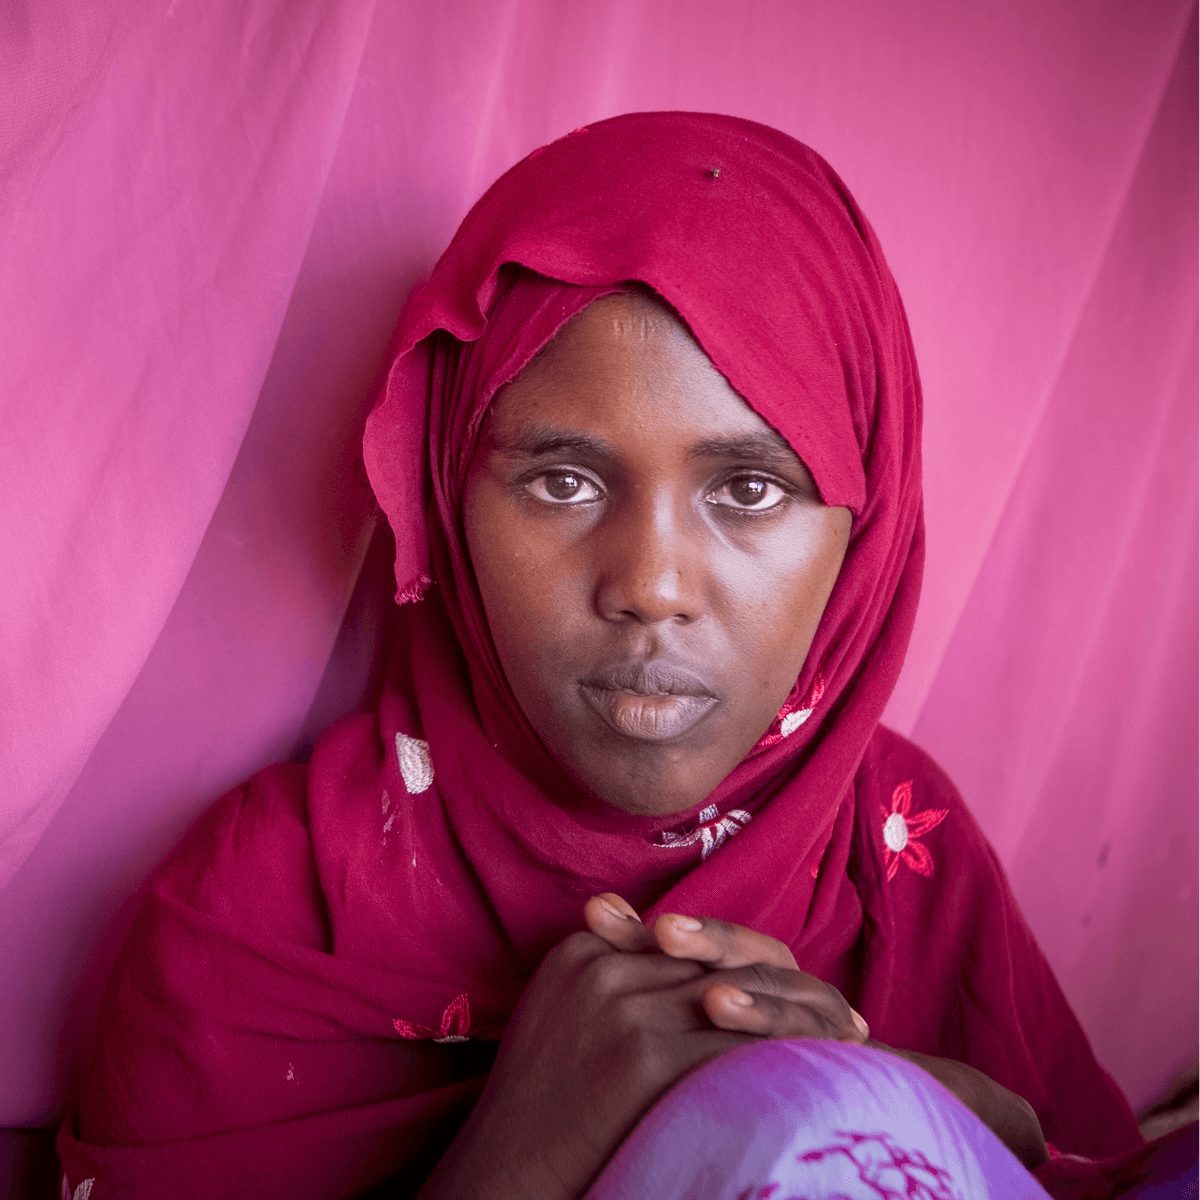 Garowe, Puntland: Hafsa waits for her husband to return to the camp for internally displaced people. Photo: Petterik Wiggers/Oxfam Novib.